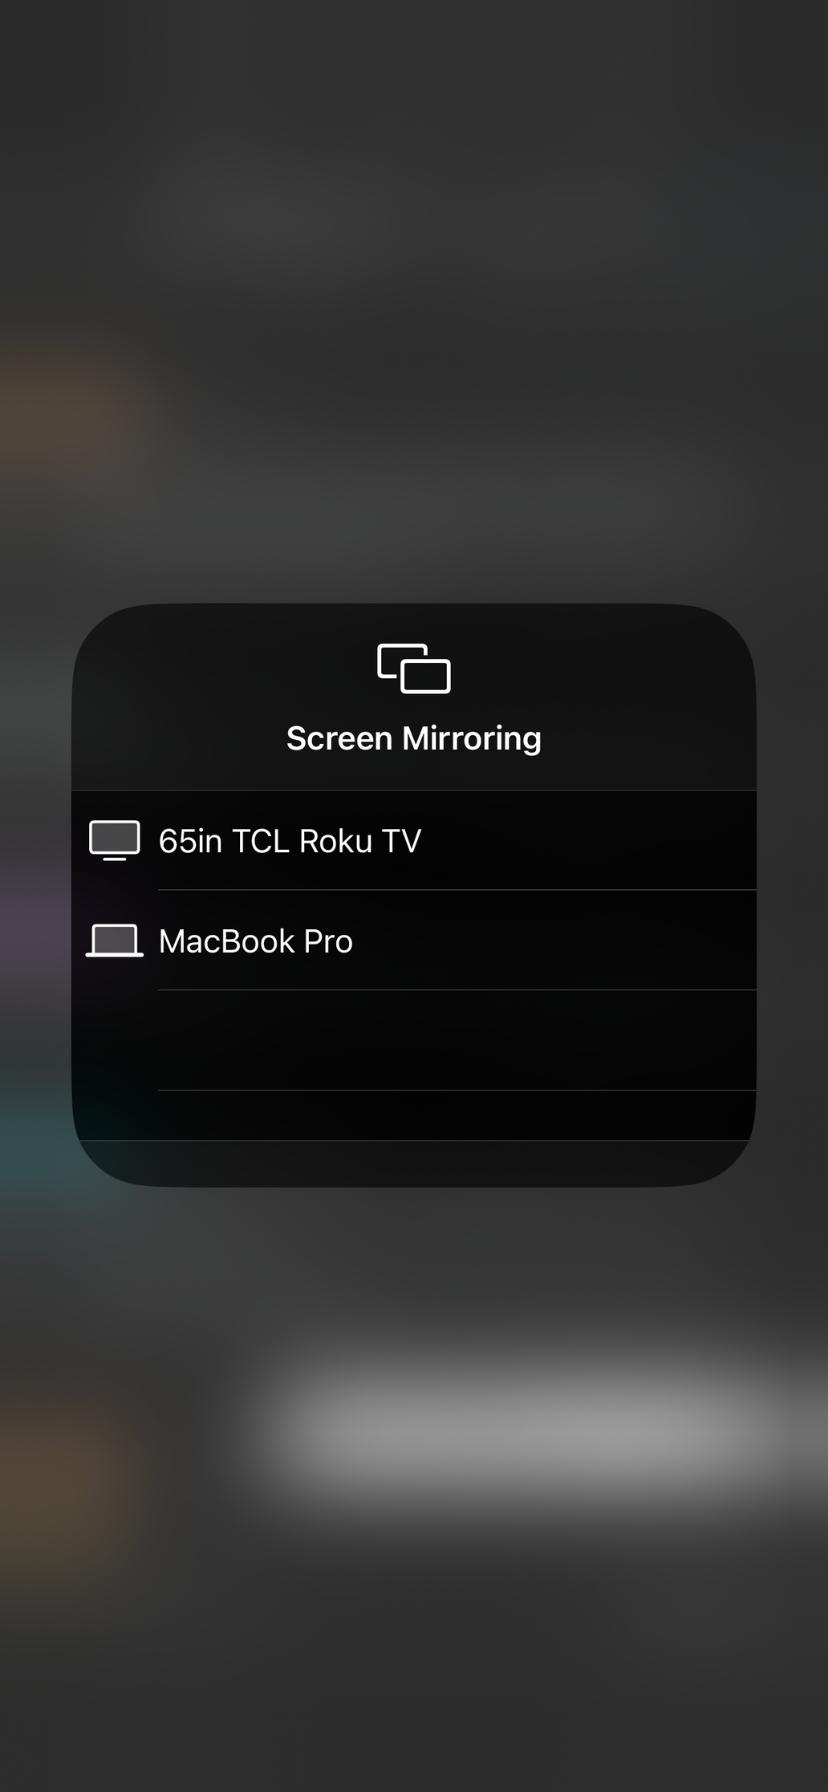 Screenshot of connecting iPhone to TV